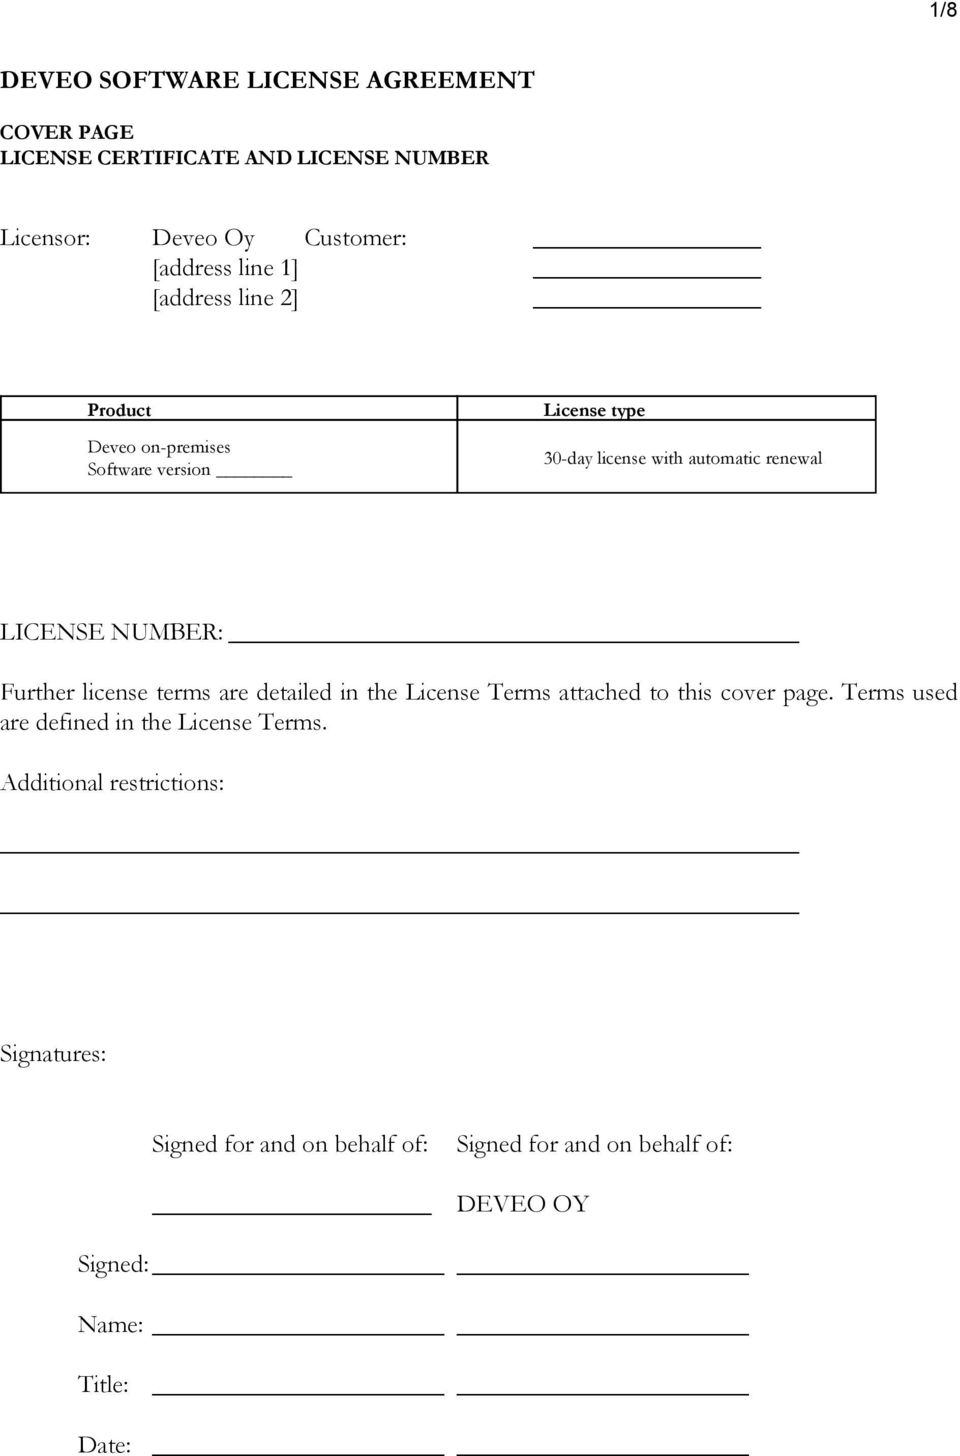 Further license terms are detailed in the License Terms attached to this cover page. Terms used are defined in the License Terms.